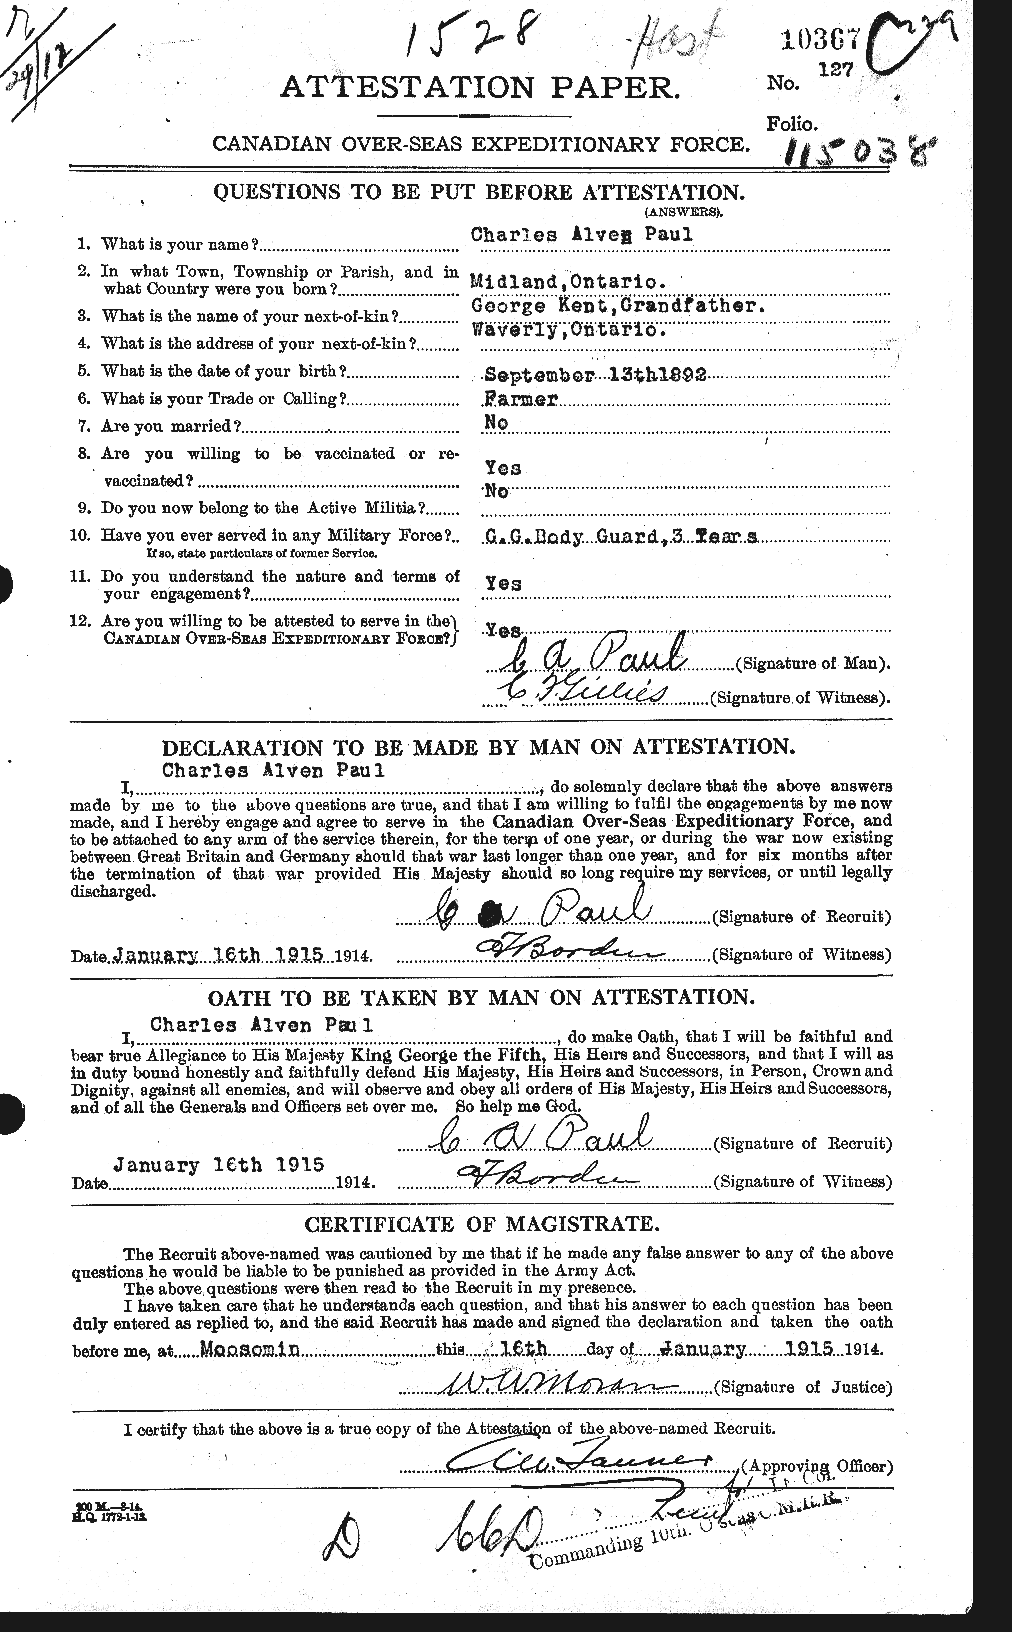 Personnel Records of the First World War - CEF 569150a